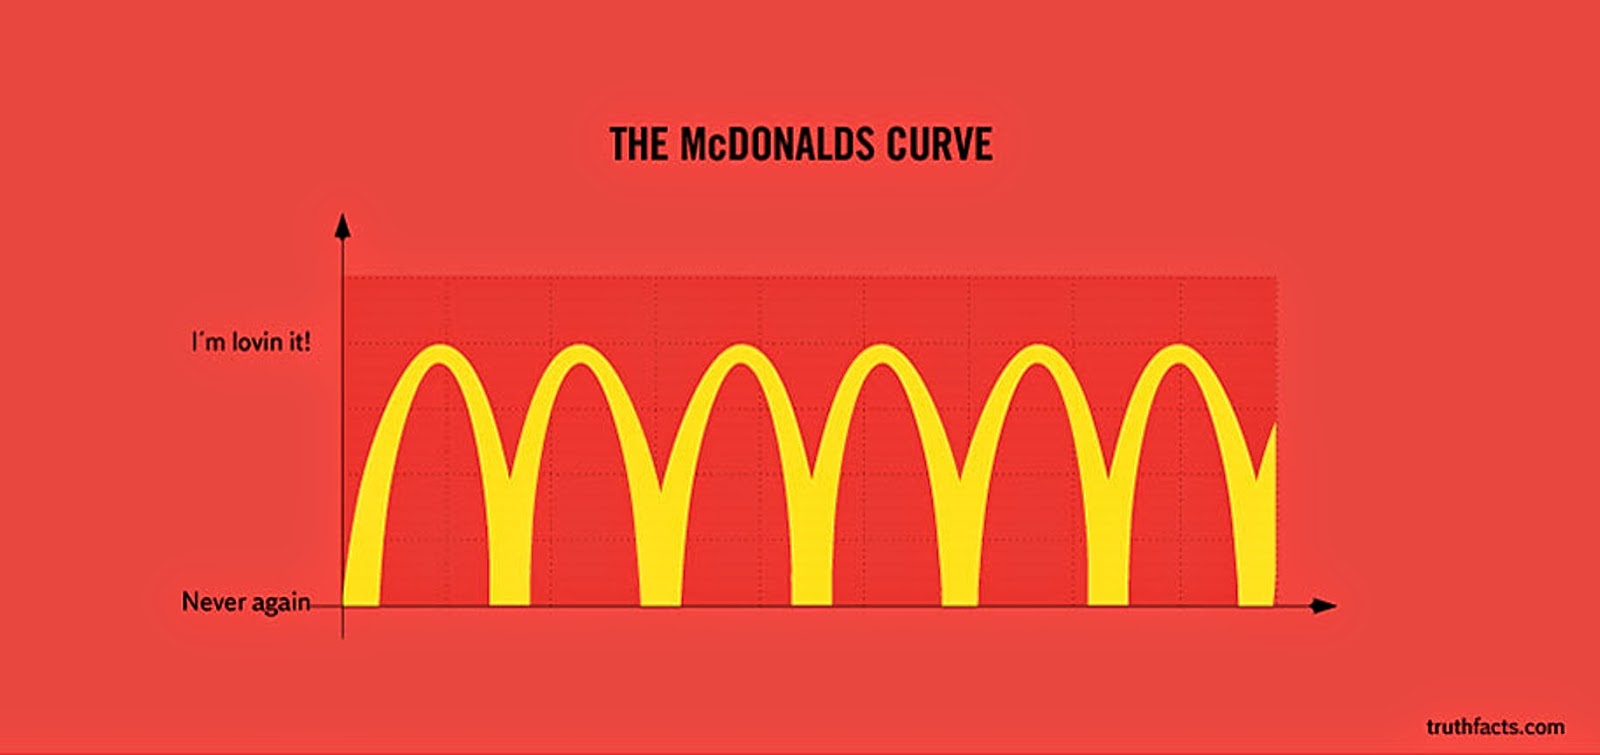 These 30 Graphs Reveal Painfully True Facts About Everyday Life